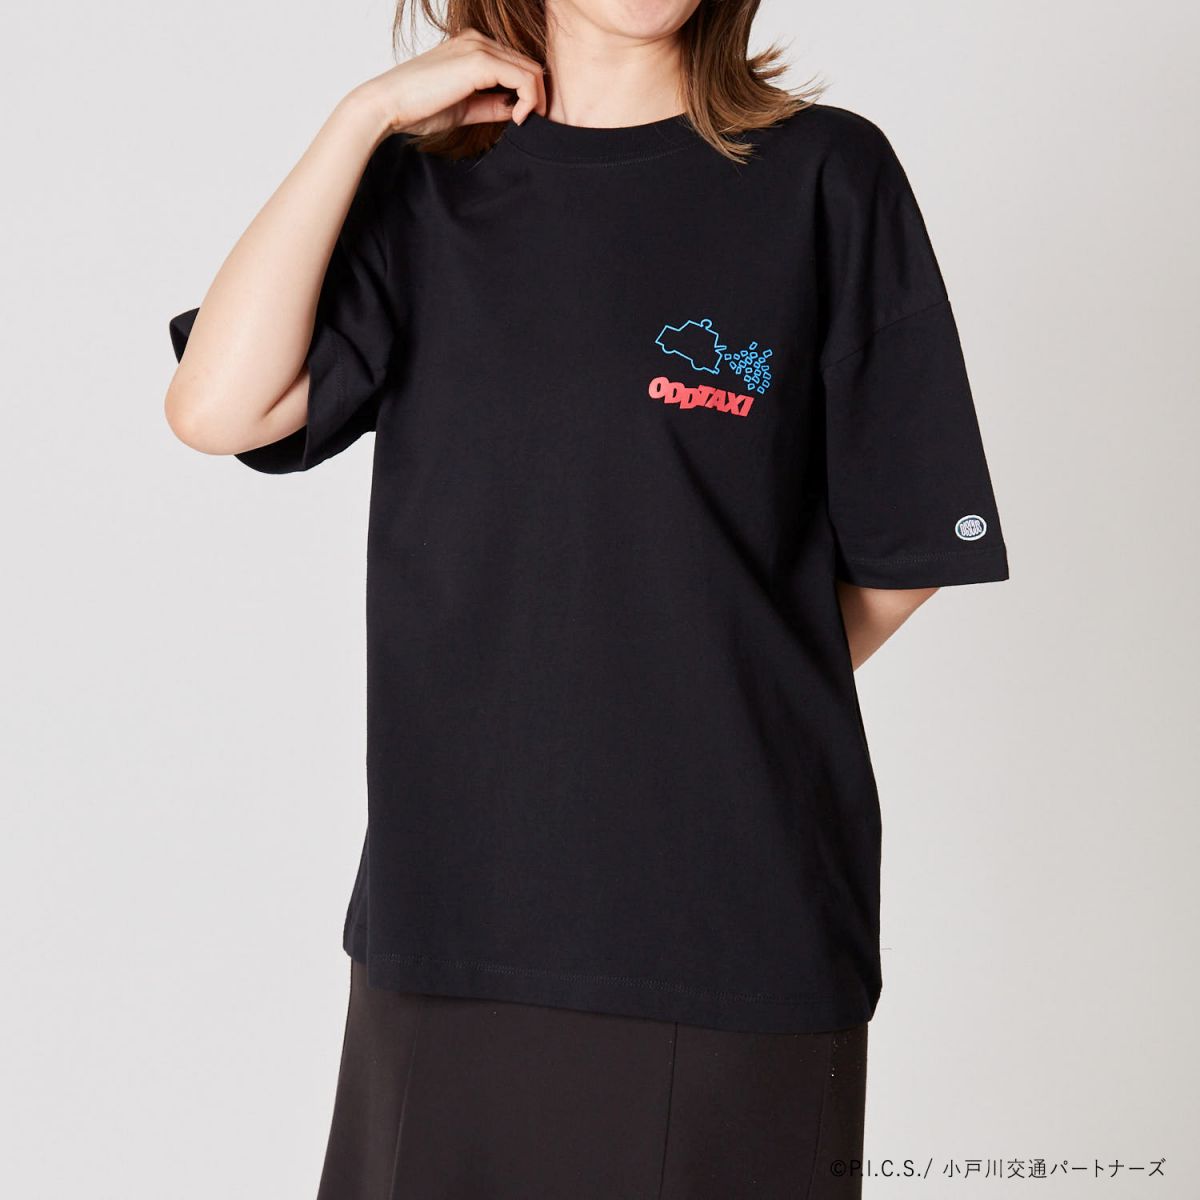 【ODDTAXI×DISCUSATHLETIC】バックプリントＴシャツ(4キャラクター)